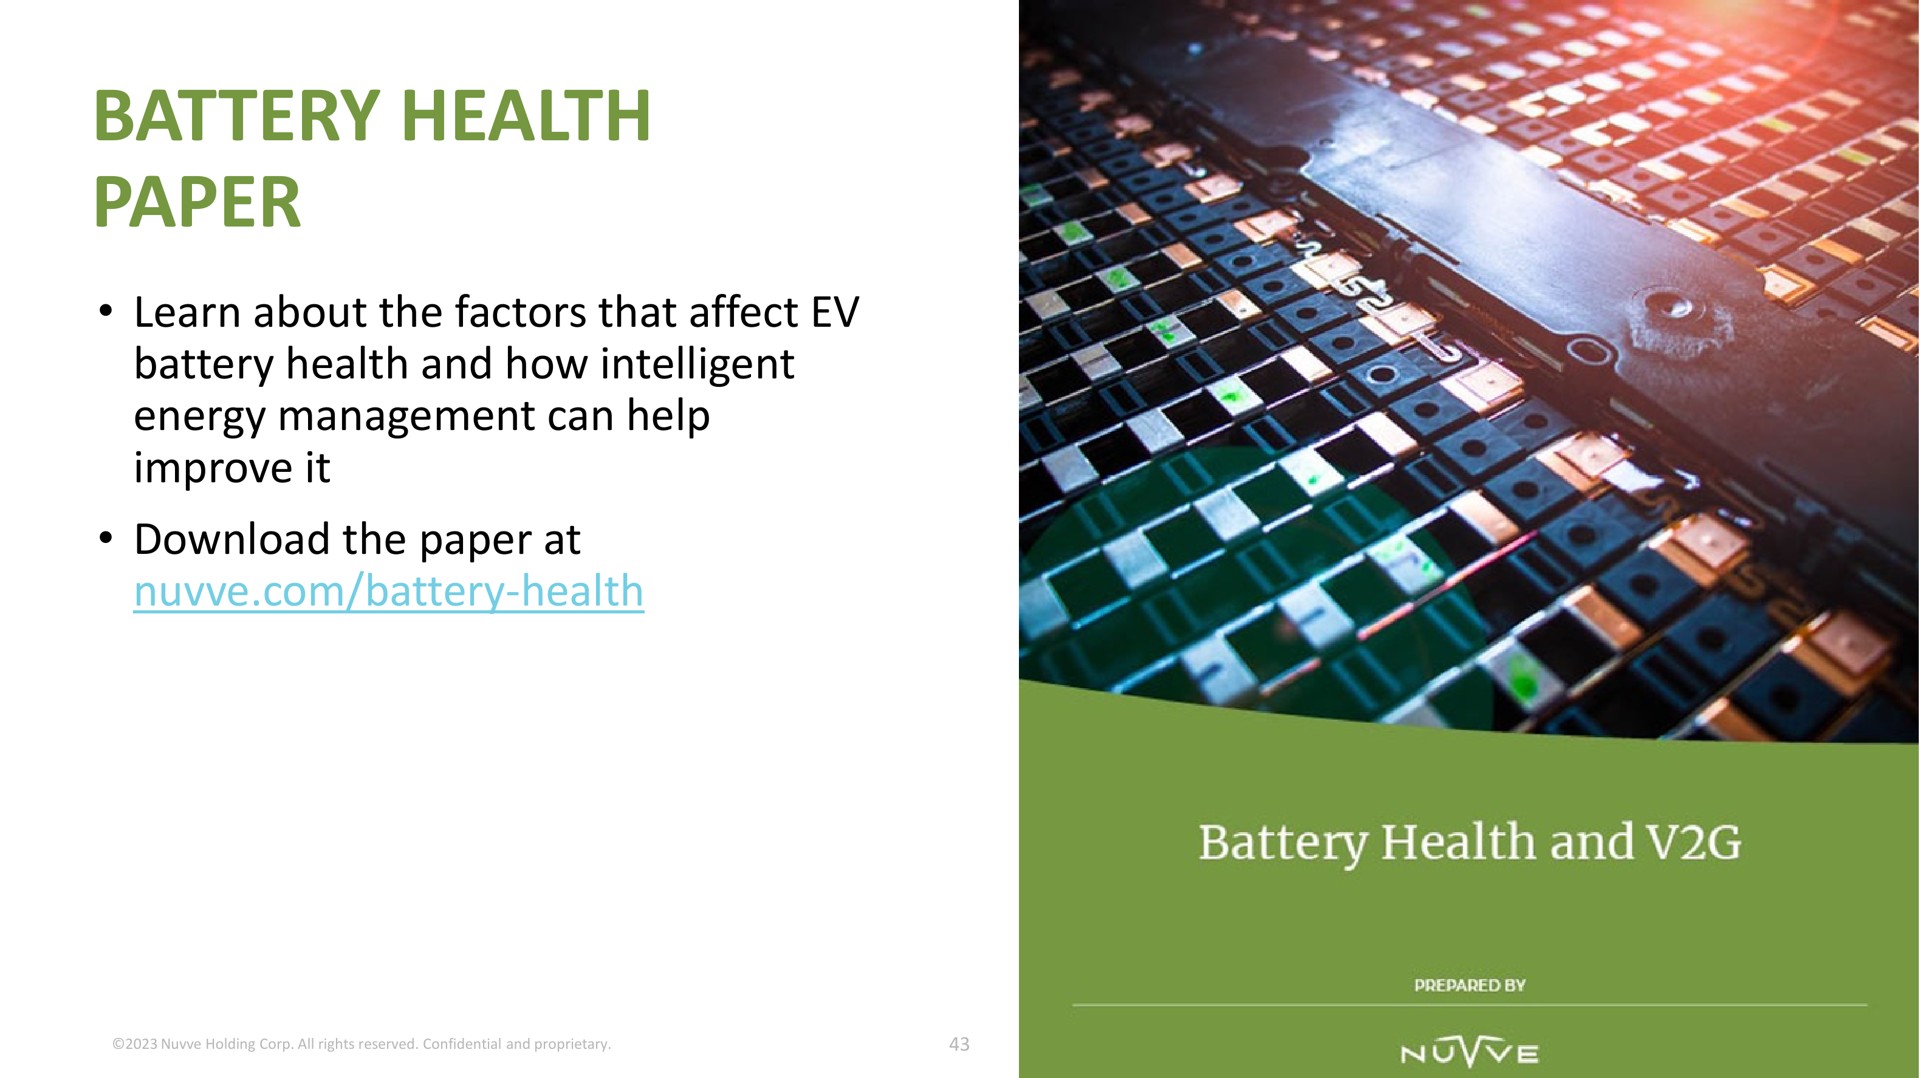 battery health paper learn about the factors that affect battery health and how intelligent energy management can help improve it the paper at battery health | Nuvve